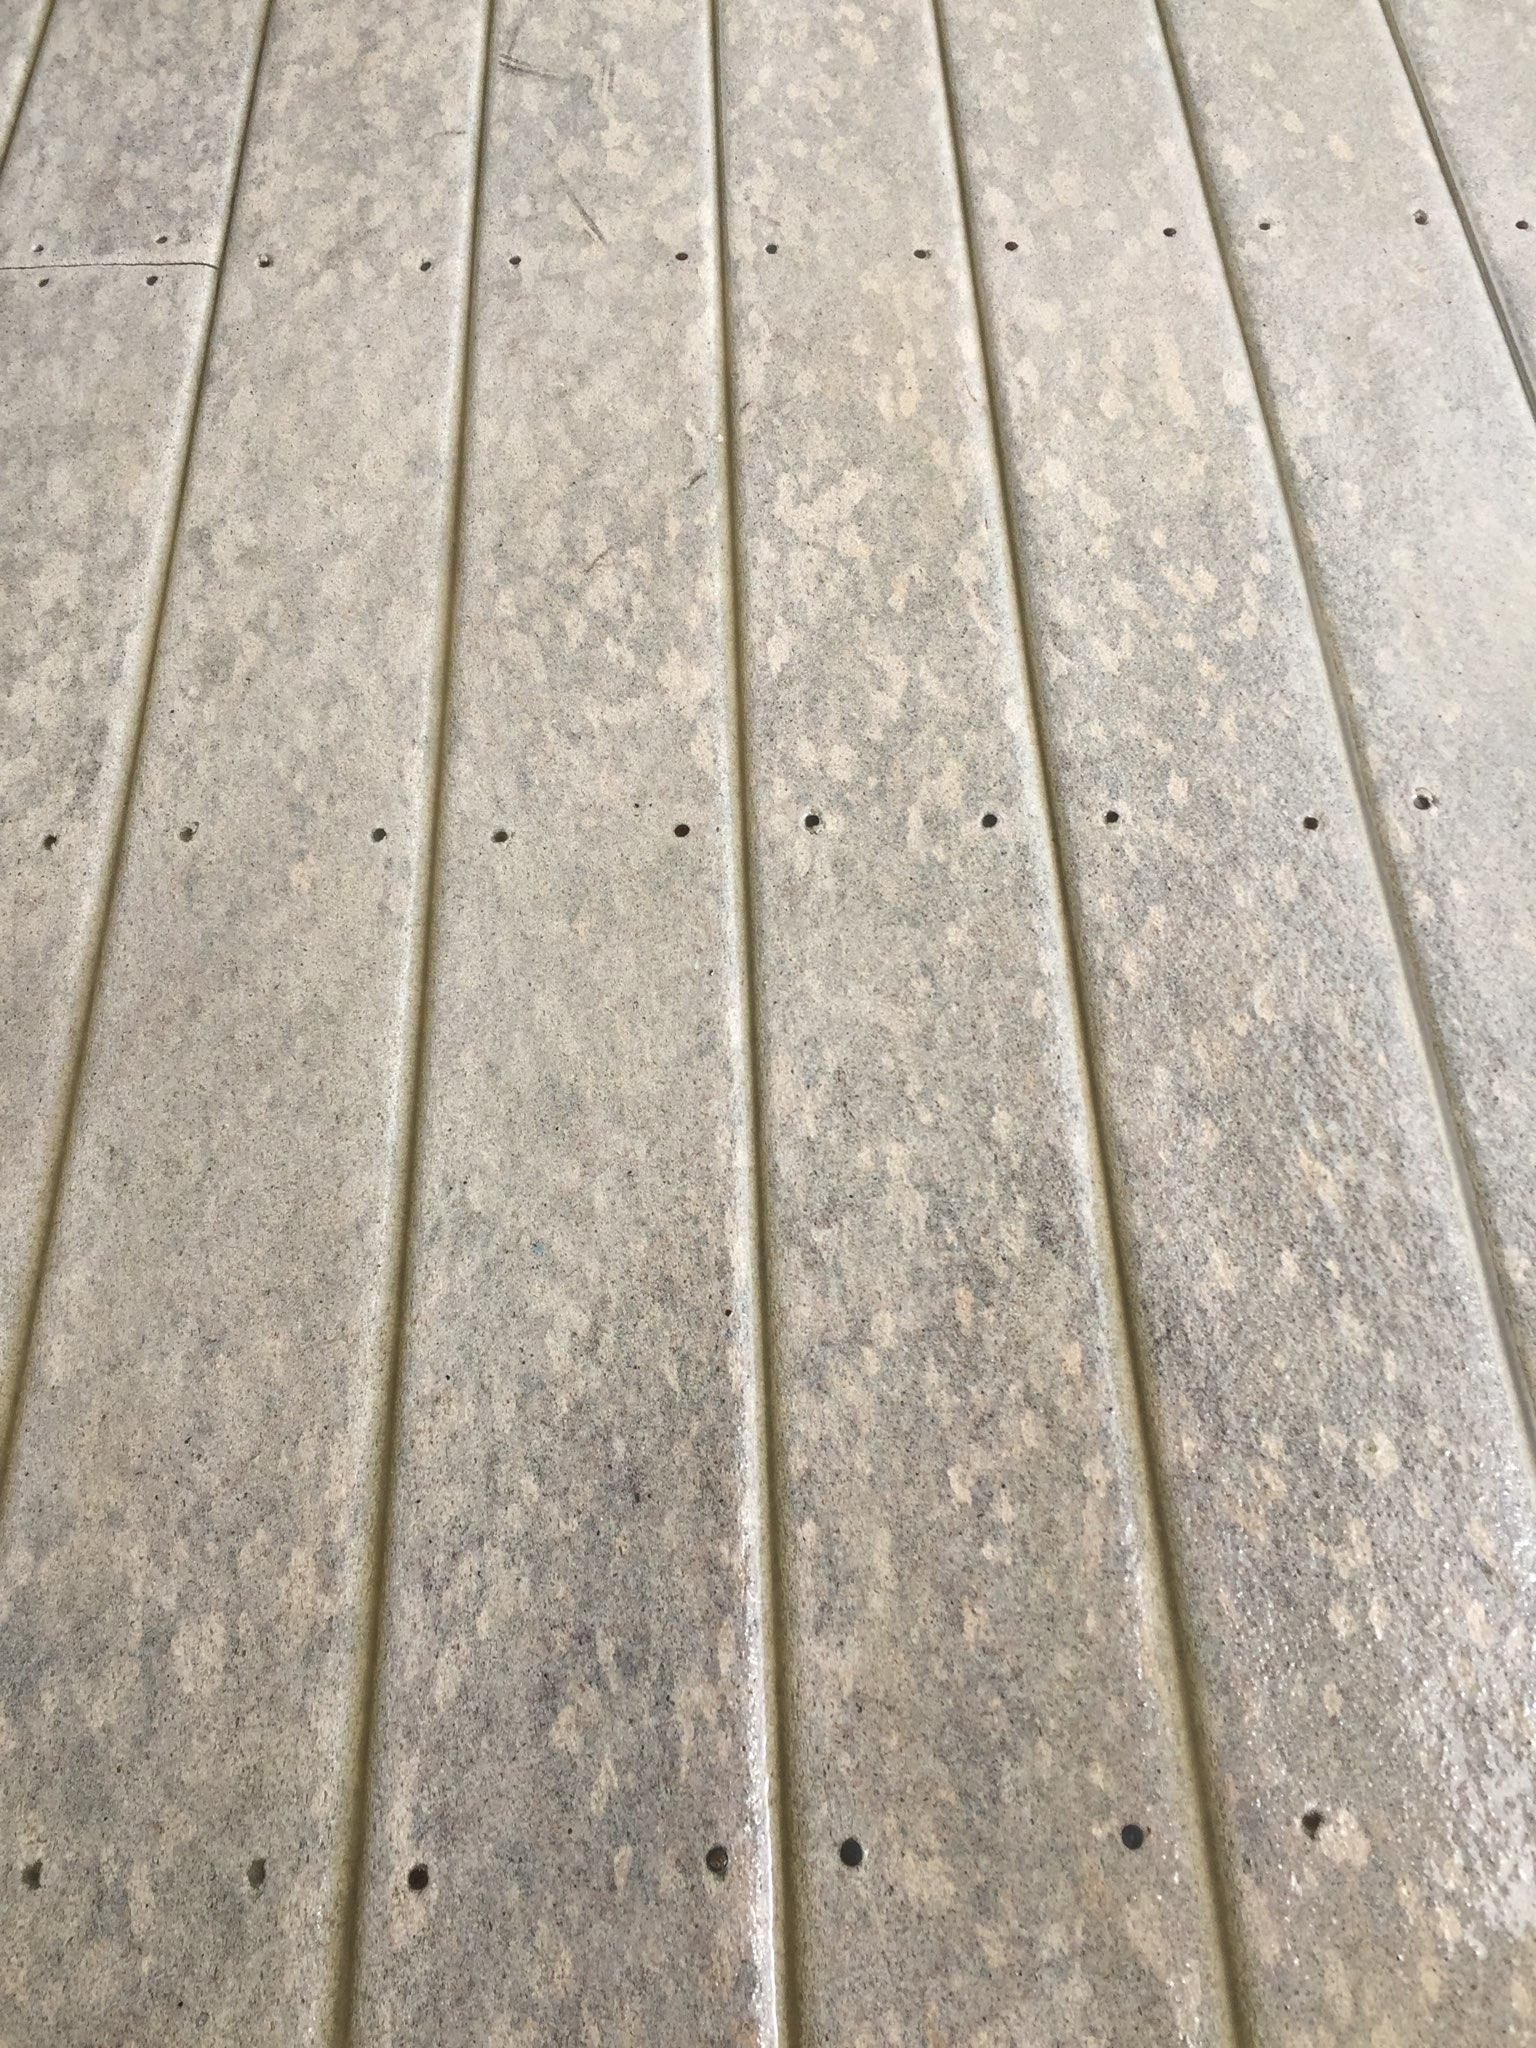 Composite Deck Looks Stained After Washing Stainssurfaces inside proportions 1536 X 2048